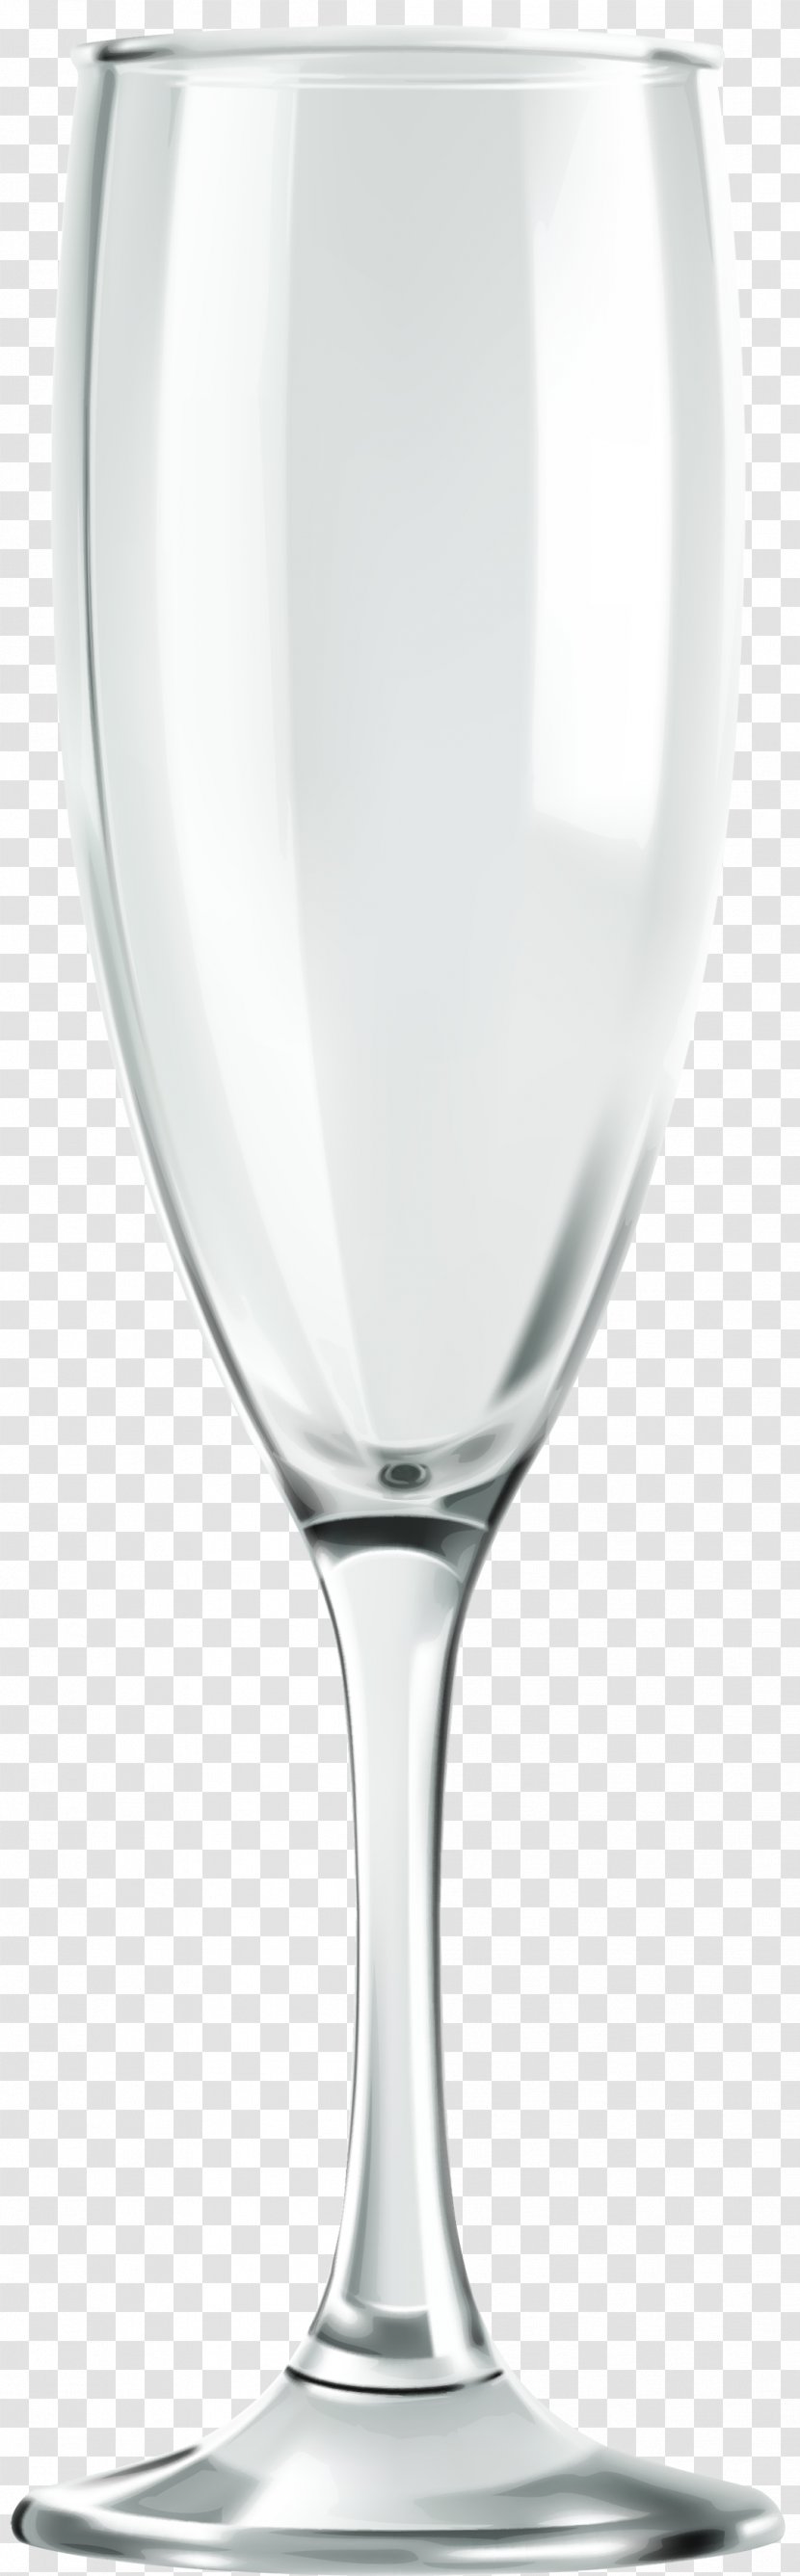 Glass - Computer Graphics - Tableware Transparent PNG